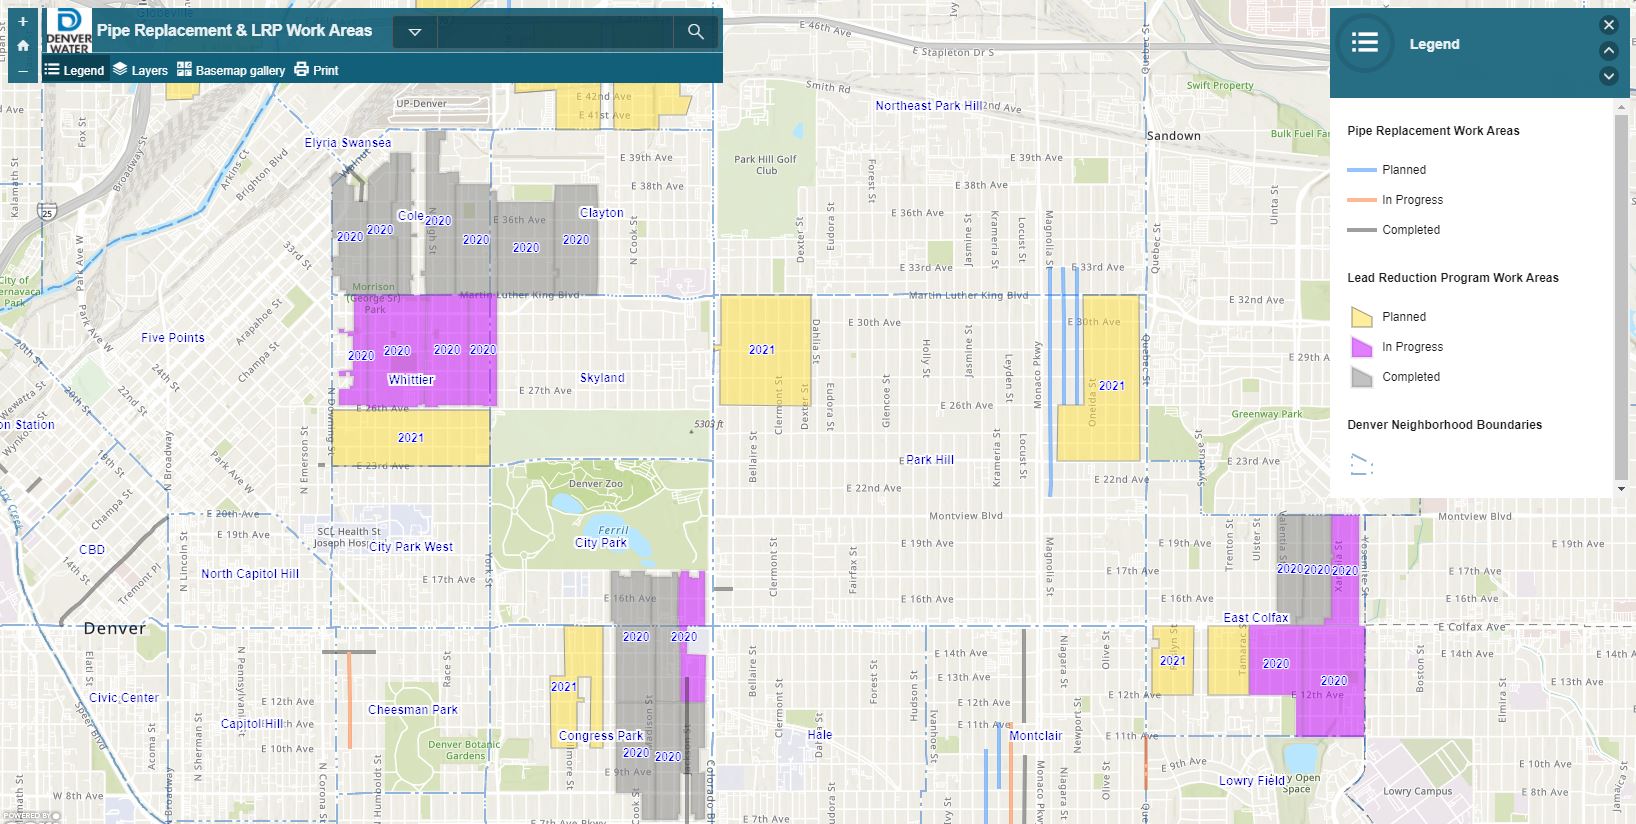 A screenshot of the map showing areas targeted for lead service line replacement work in 2020 and 2021. Image credit: Denver Water.